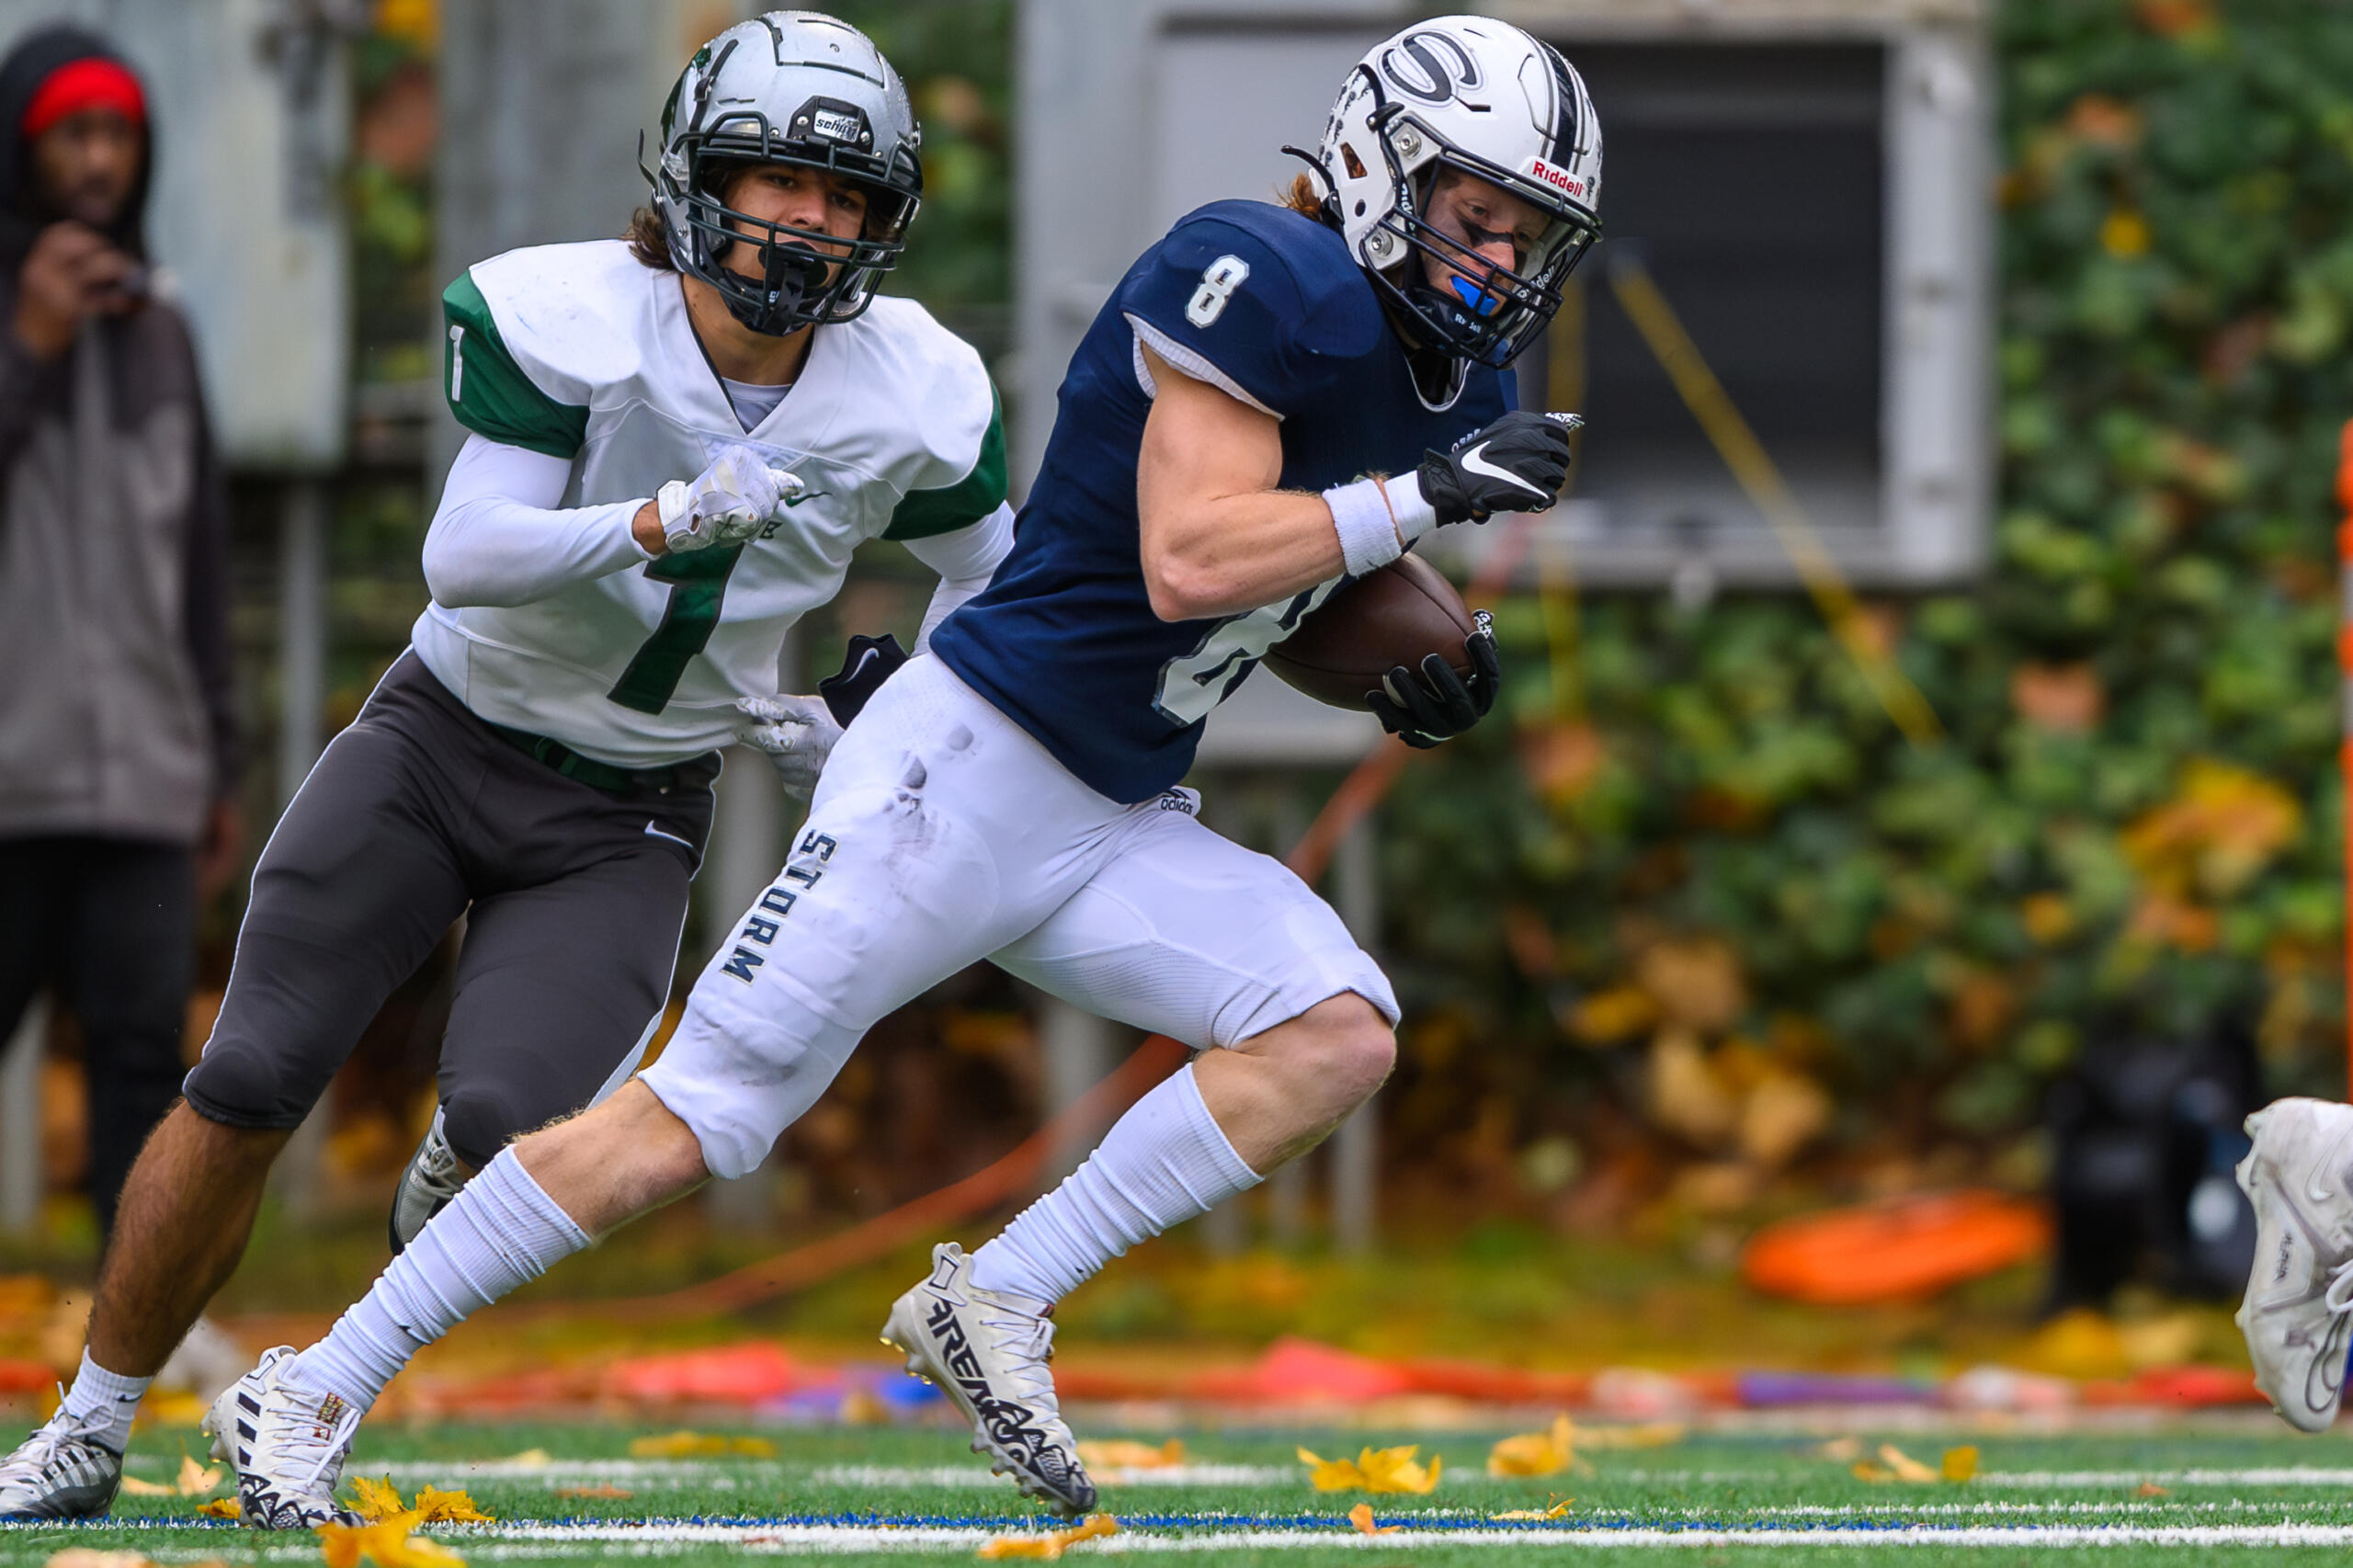 Skyview receiver Gavin Packer races up field during Skyview's 42-7 Class 4A state playoff victory over Skyline on Saturday, Nov. 11, 2023, at Kiggins Bowl.